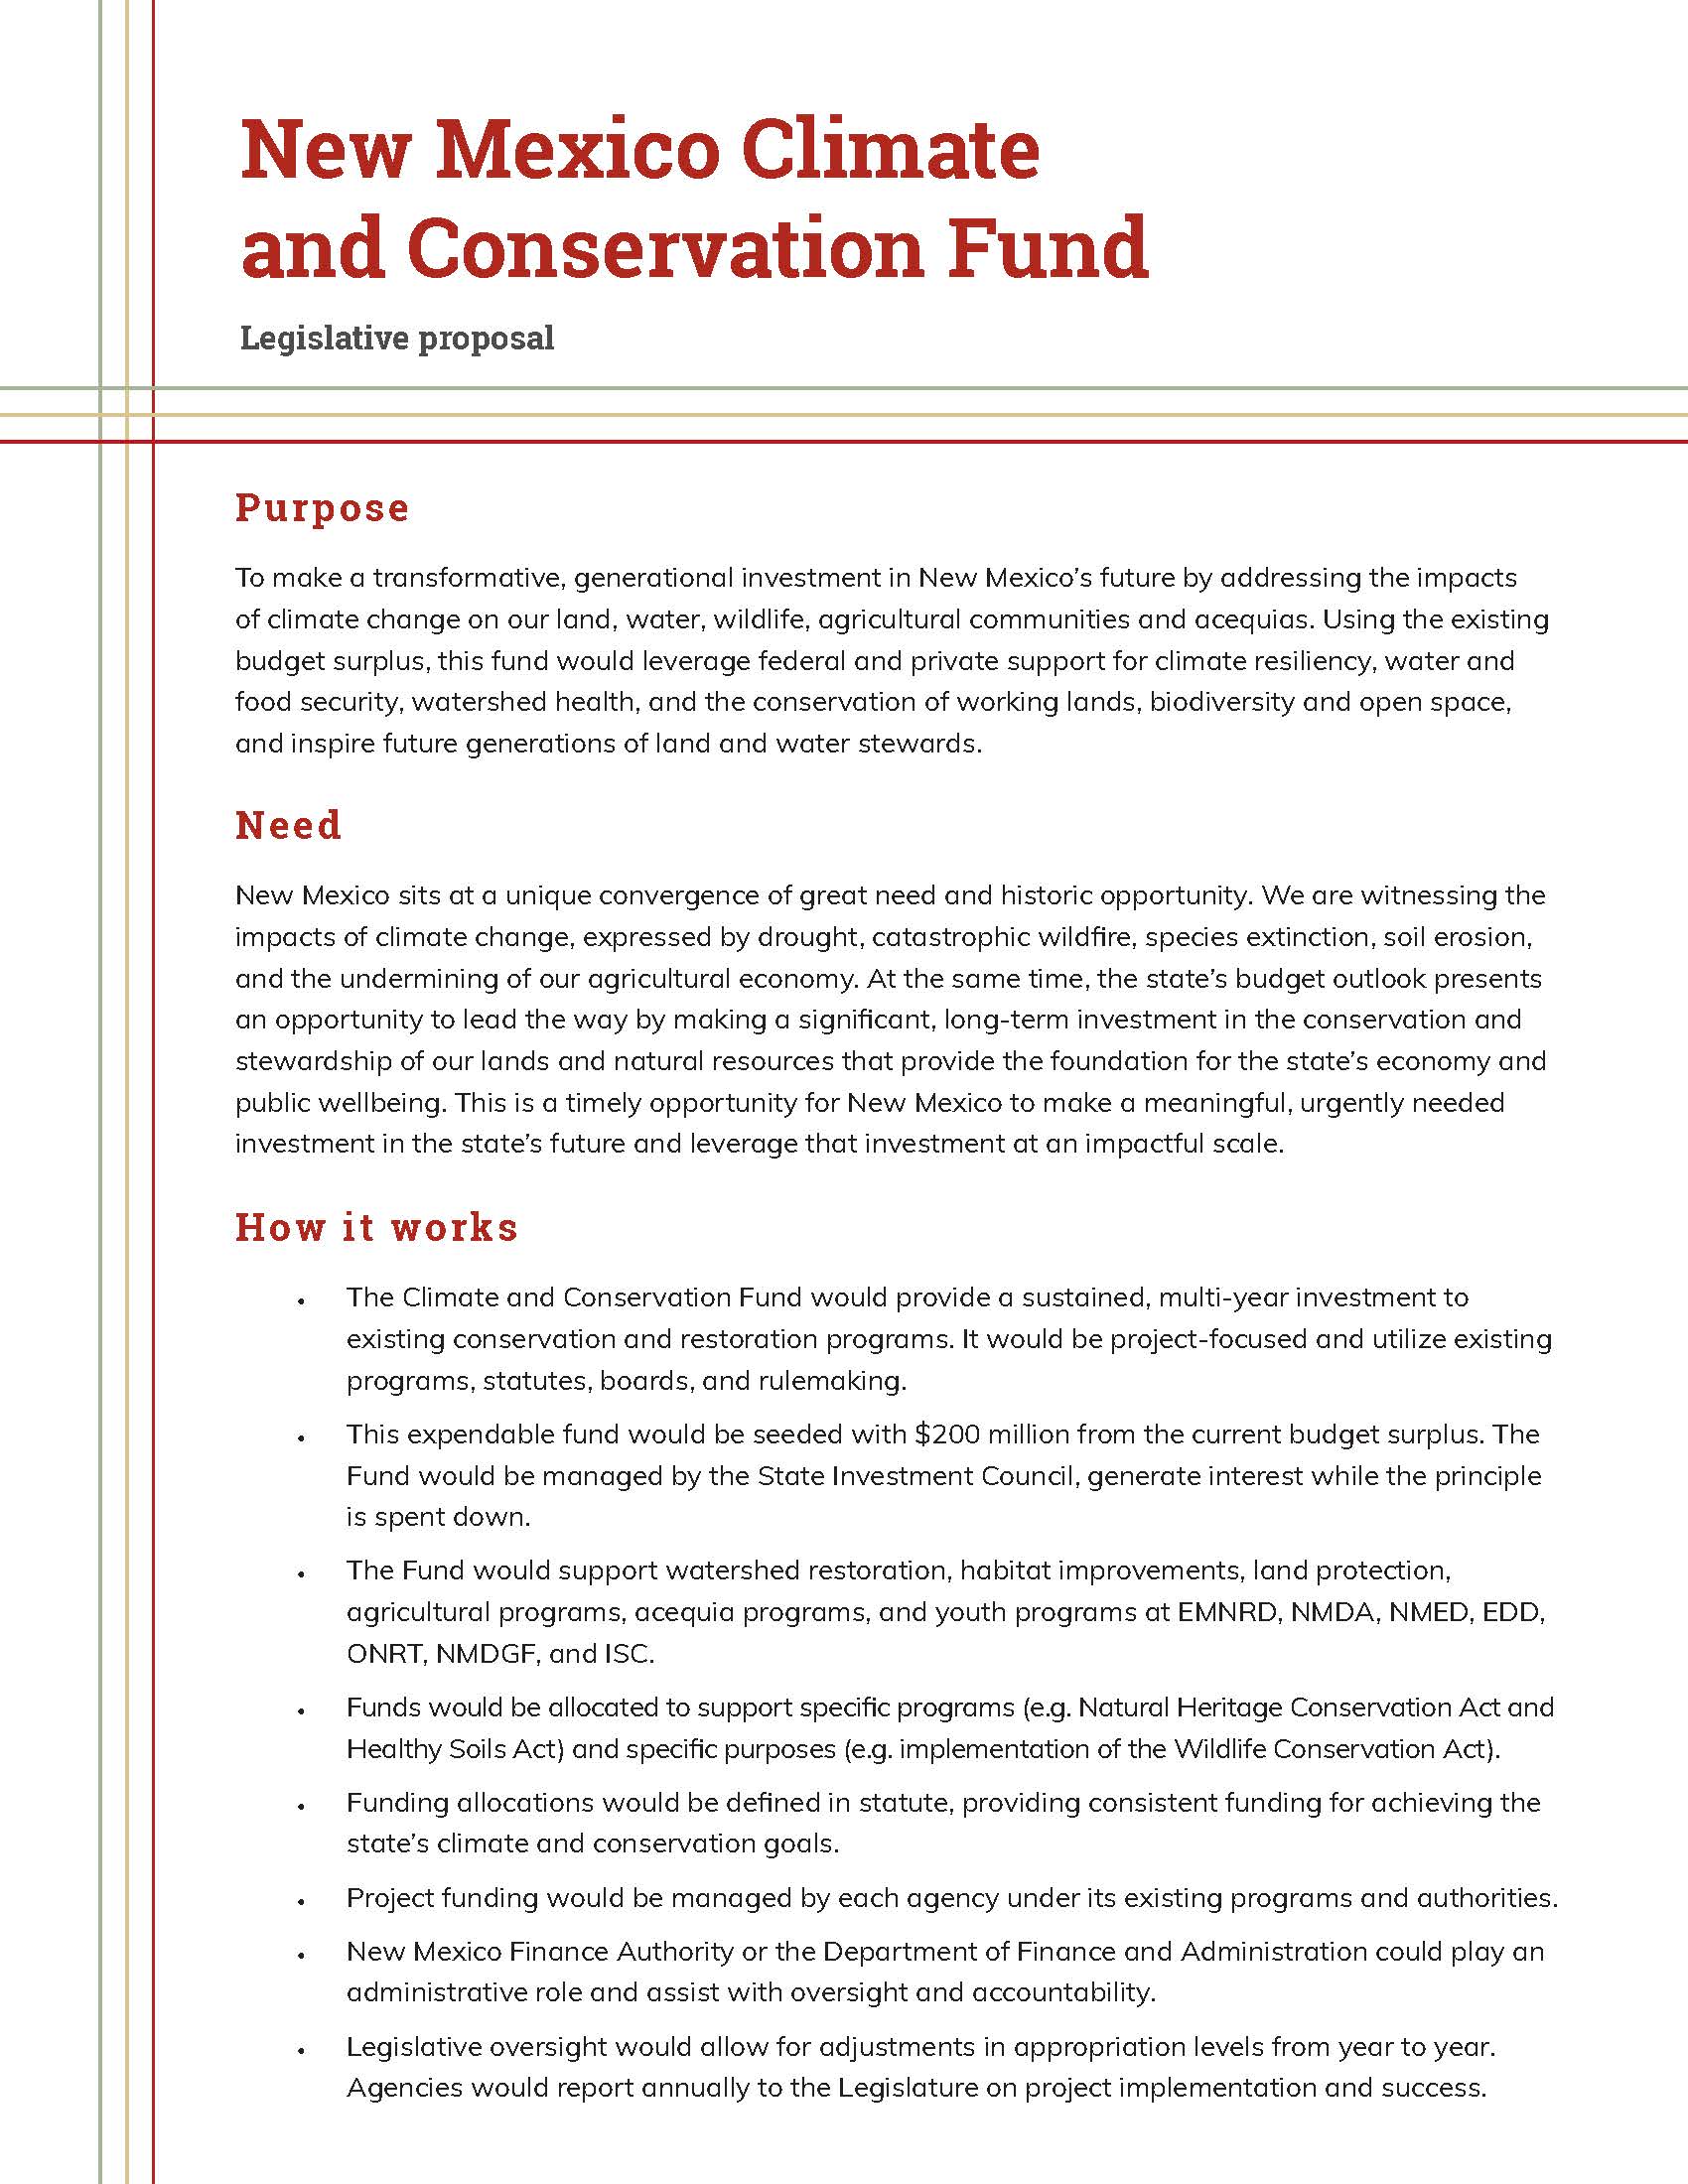 New Mexico Climate and Conservation Fund Legislative Proposal _ vF.91721_Page_1